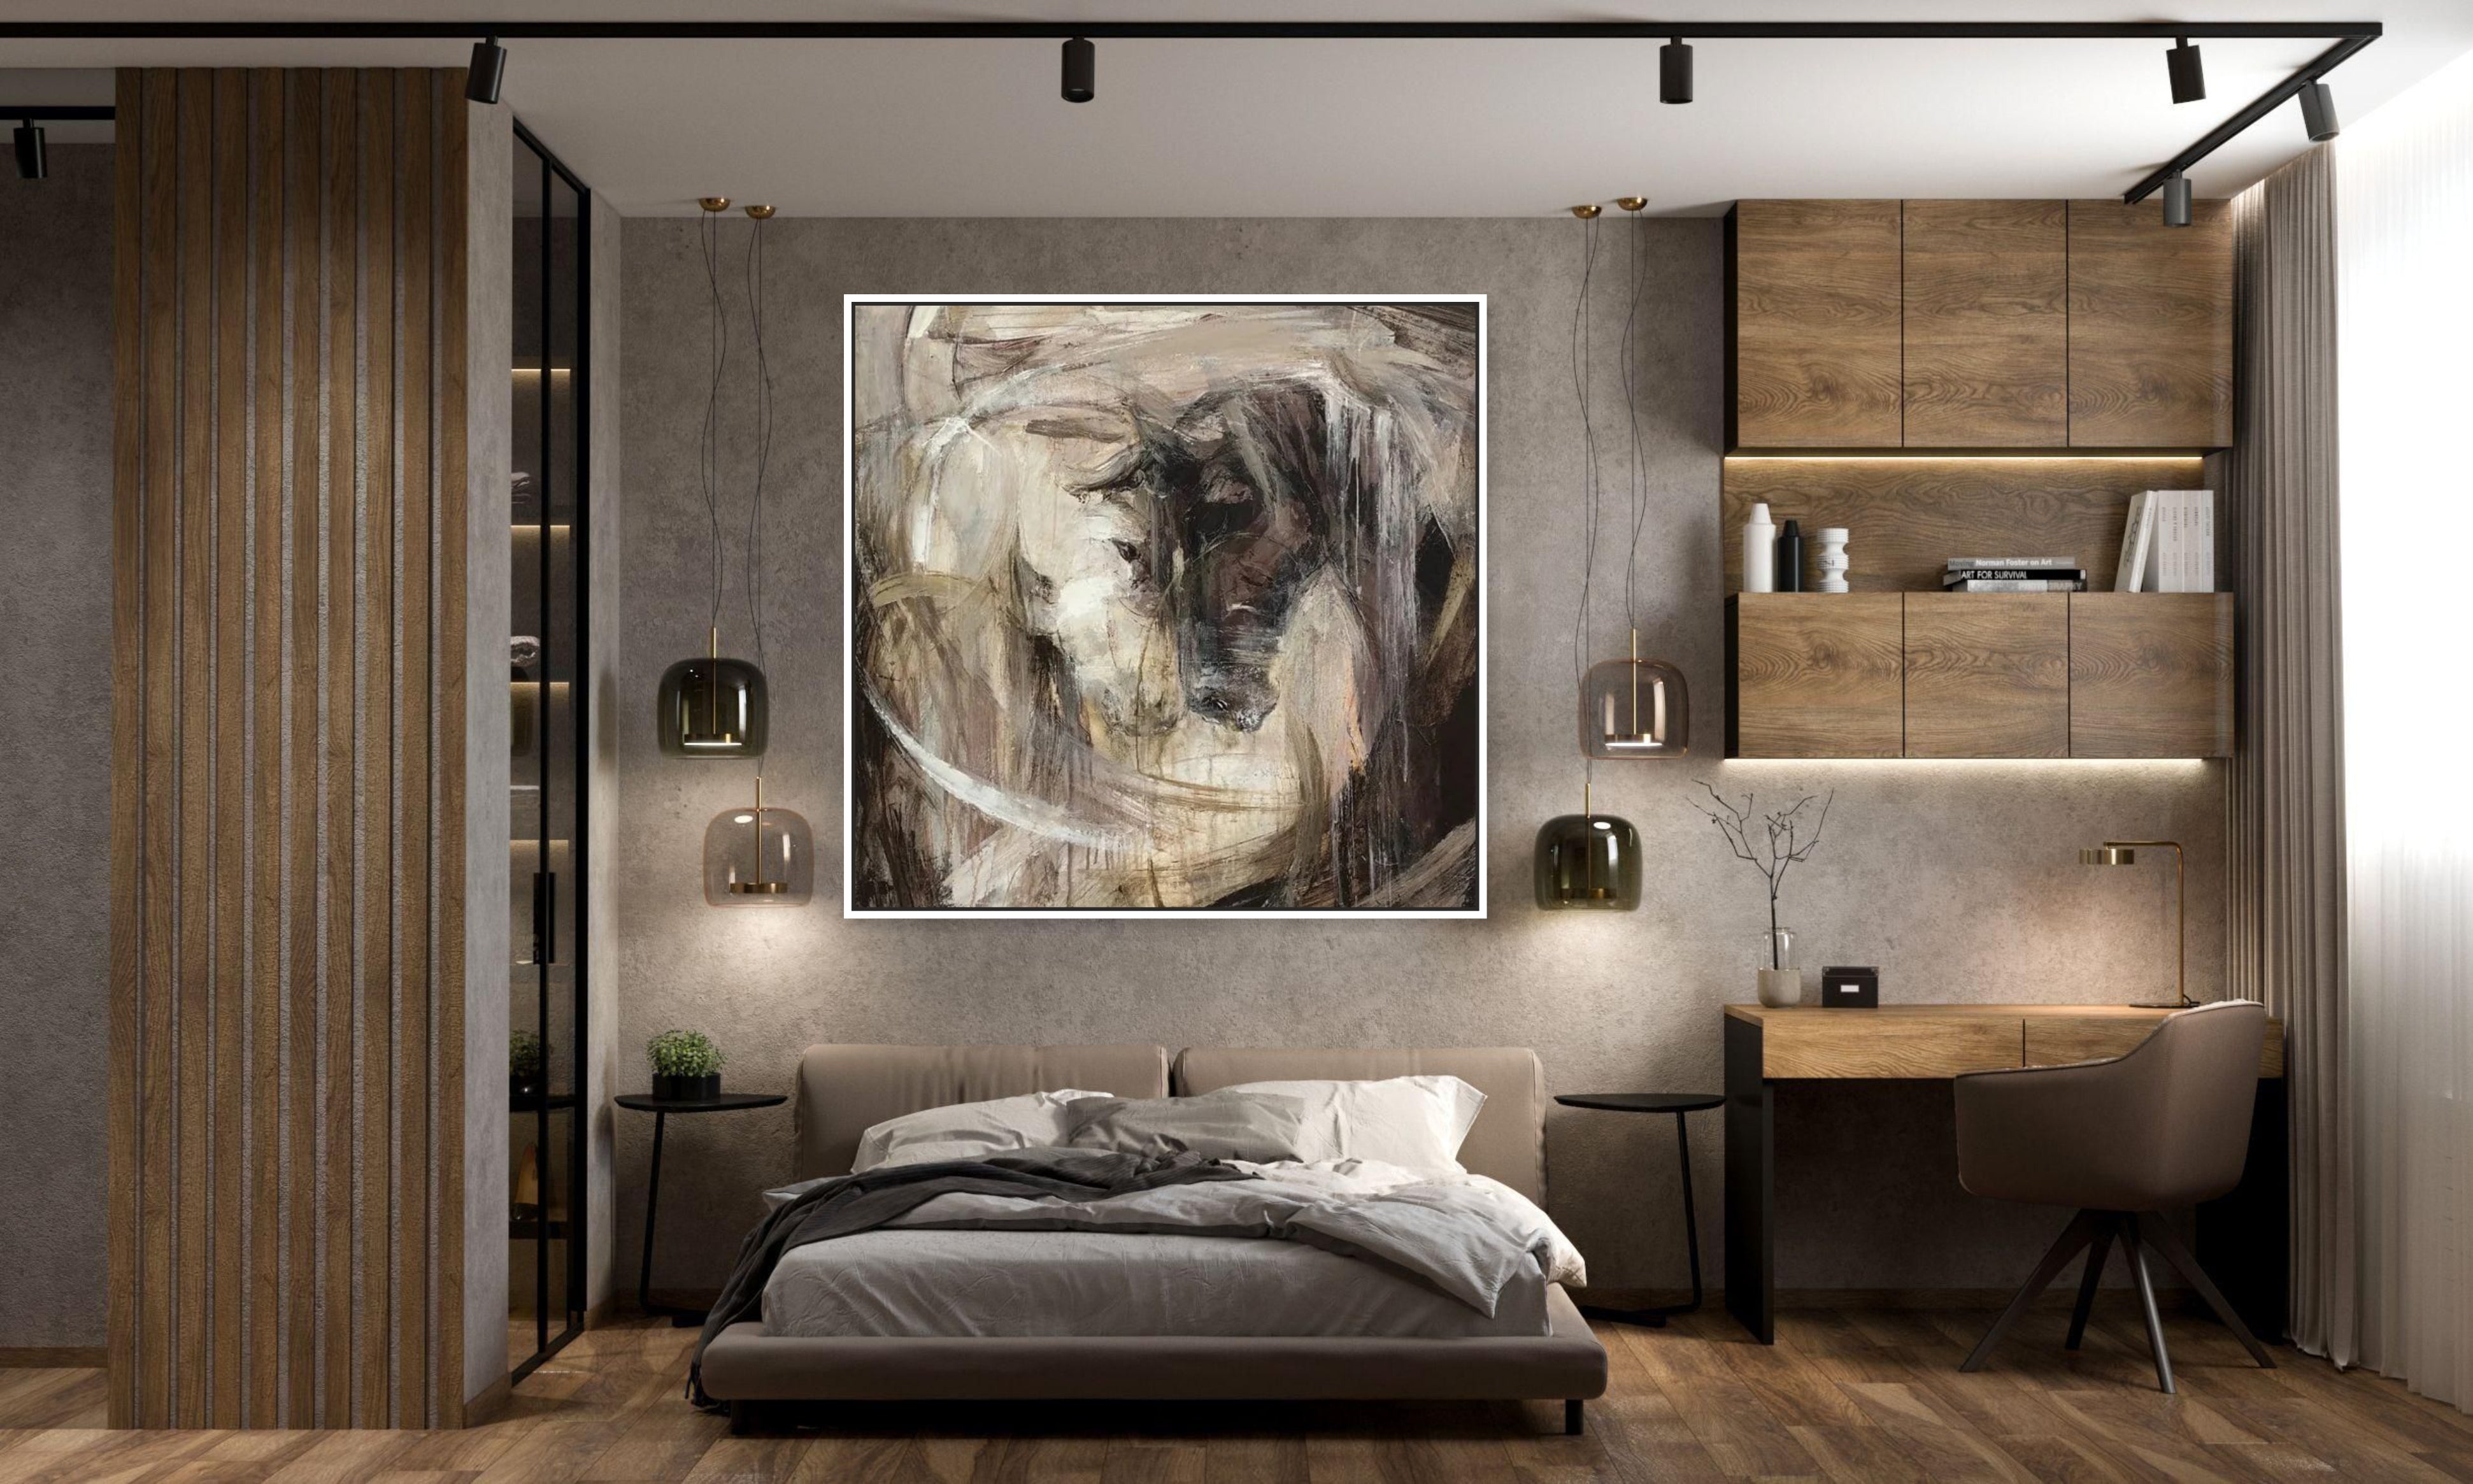 What Paintings Are The Best to Have In a Master Bedroom In Feng Shui? slider2-image-1